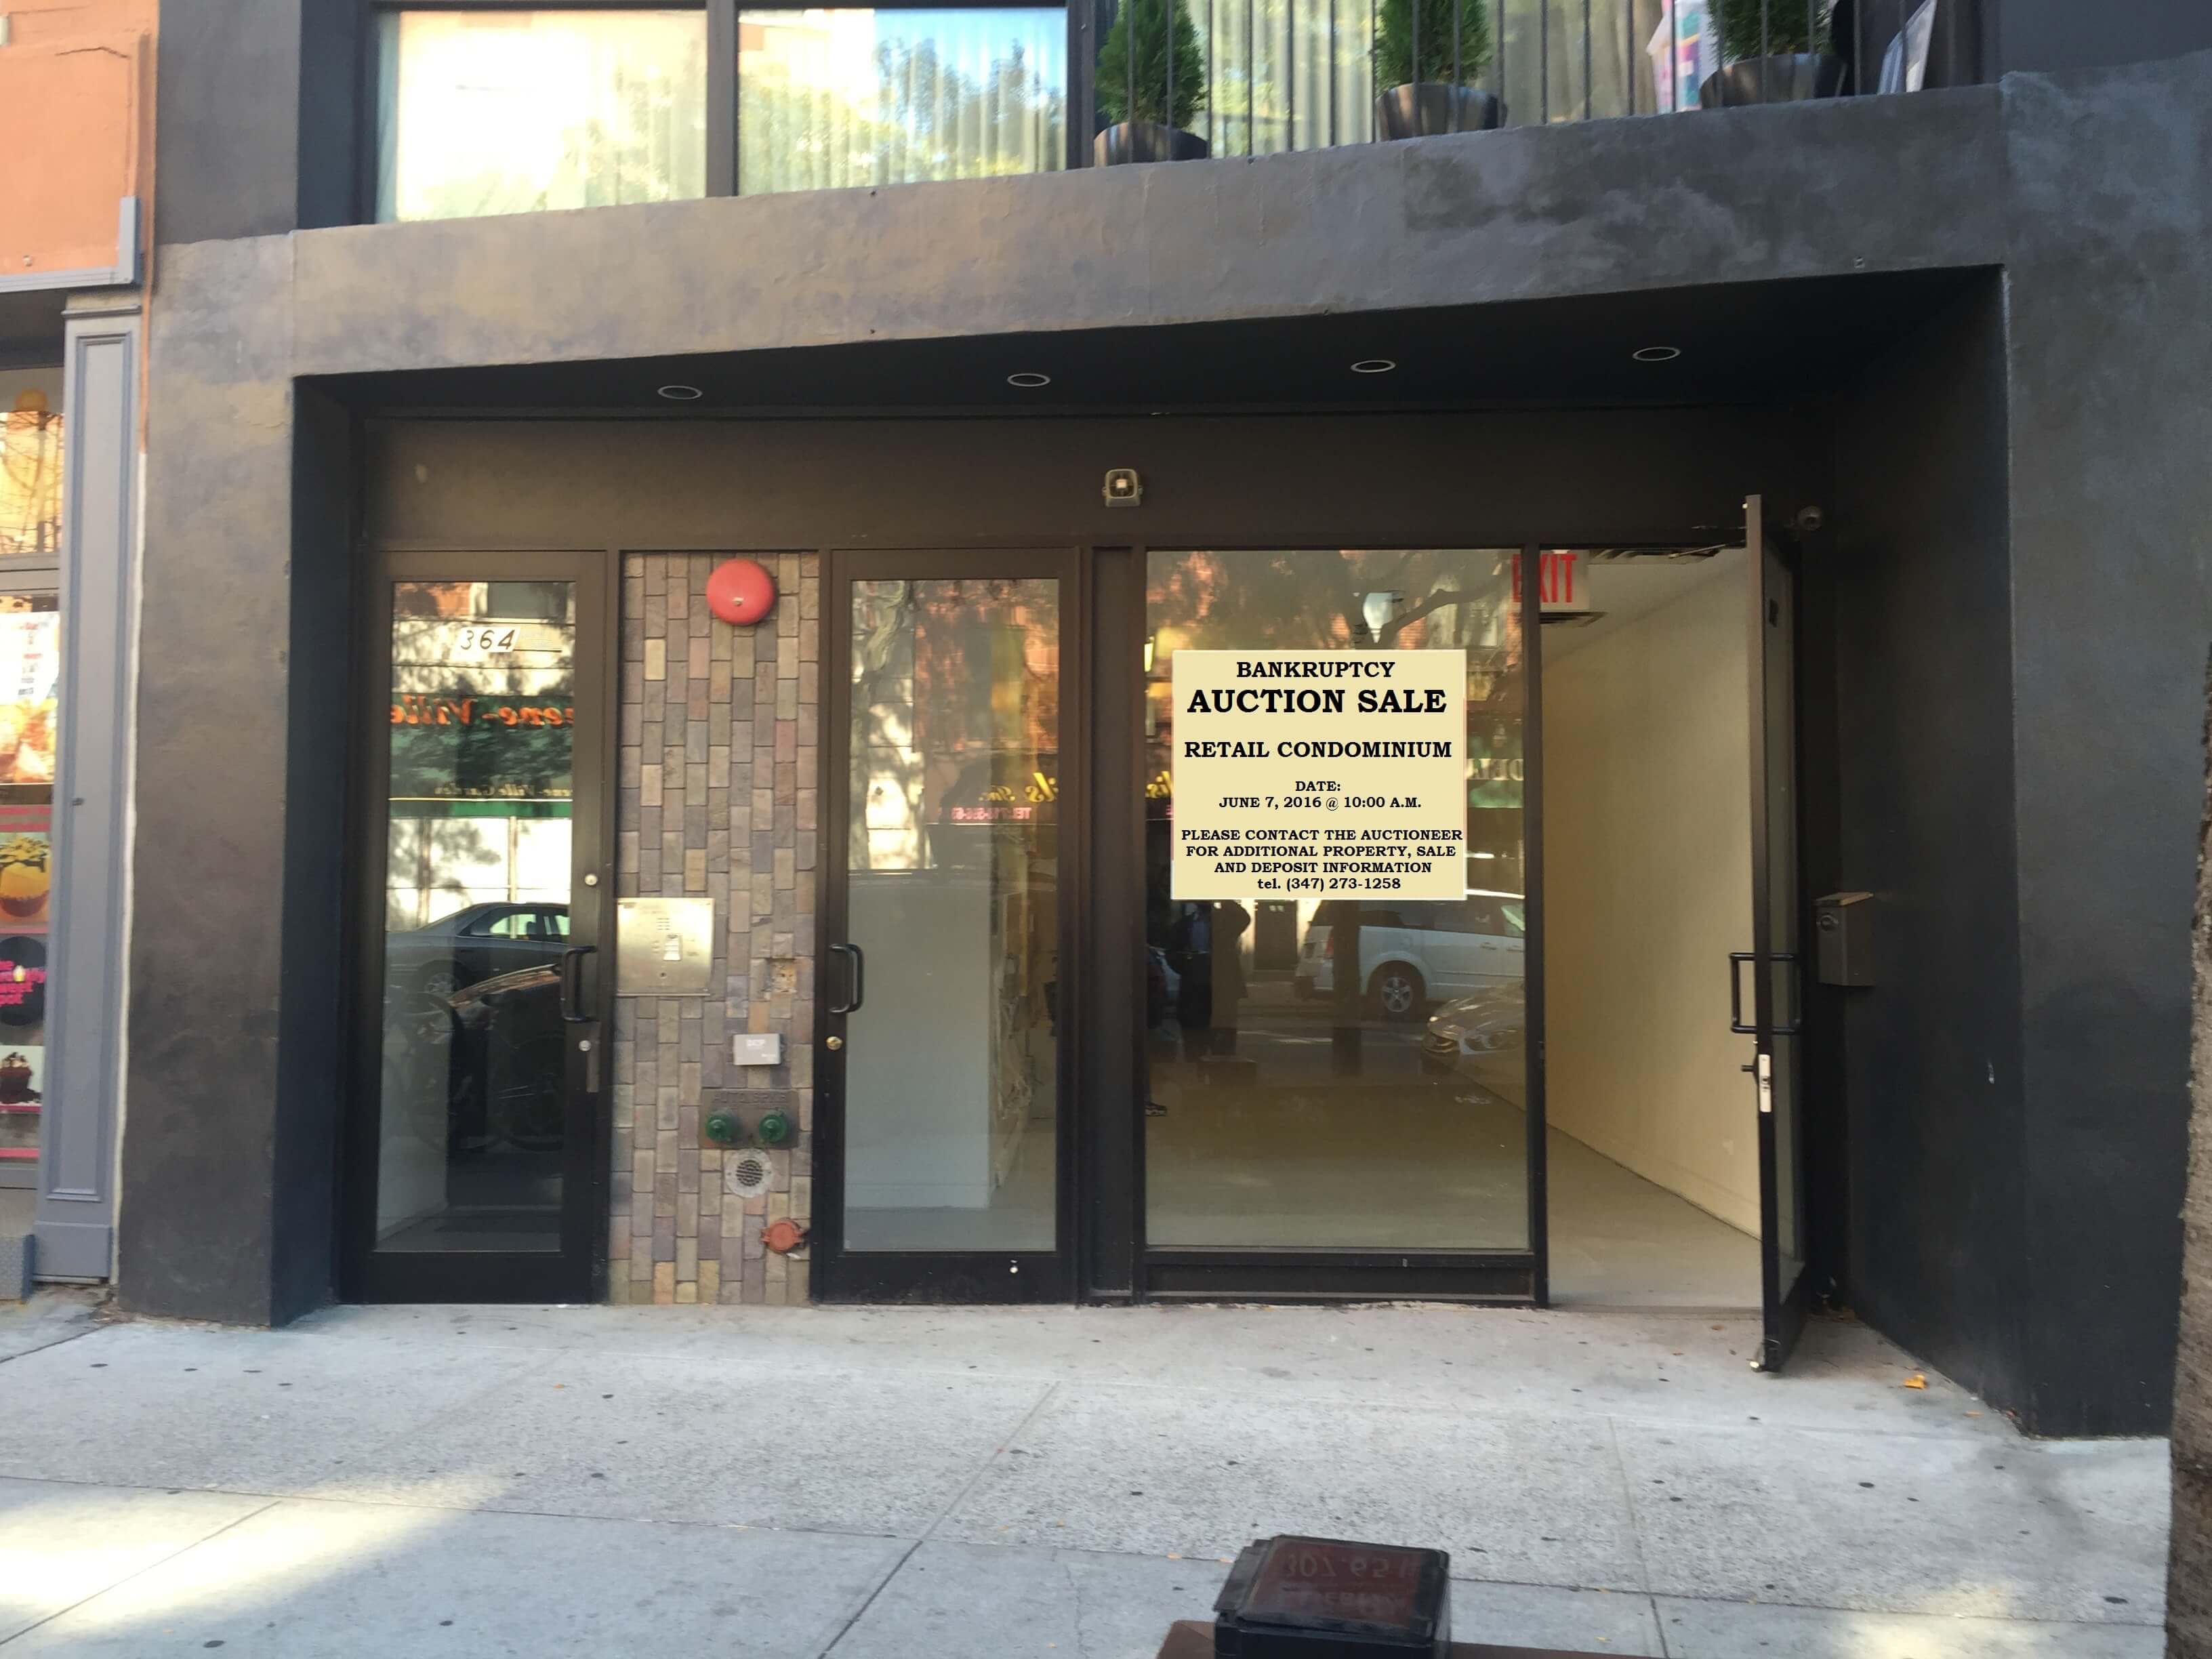 Commercial Real Estate Brooklyn Auction Fort Greene 364 Myrtle Avenue